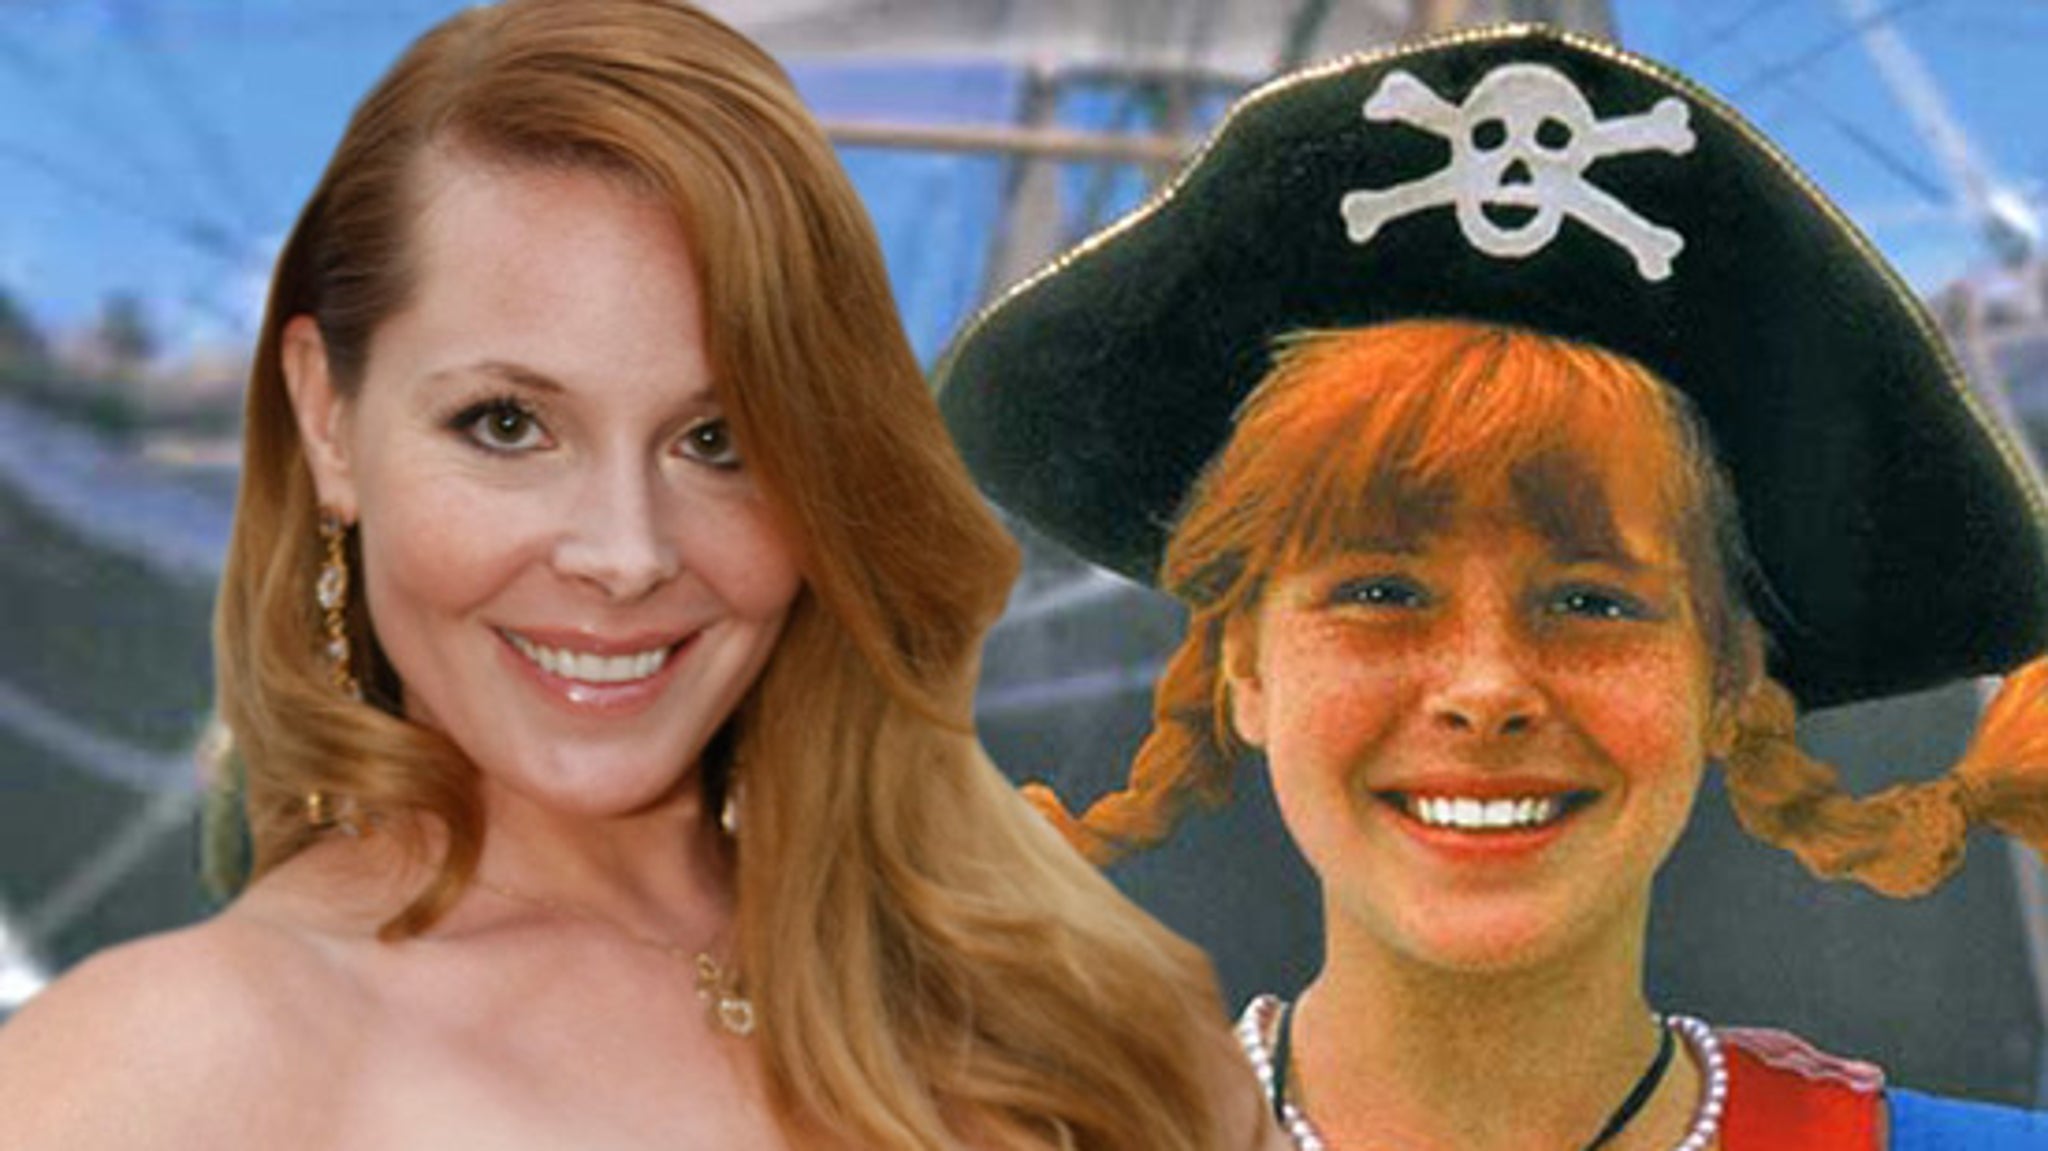 Pippi Longstocking Star Tami Erin Sex Tape Being Shopped Shes 